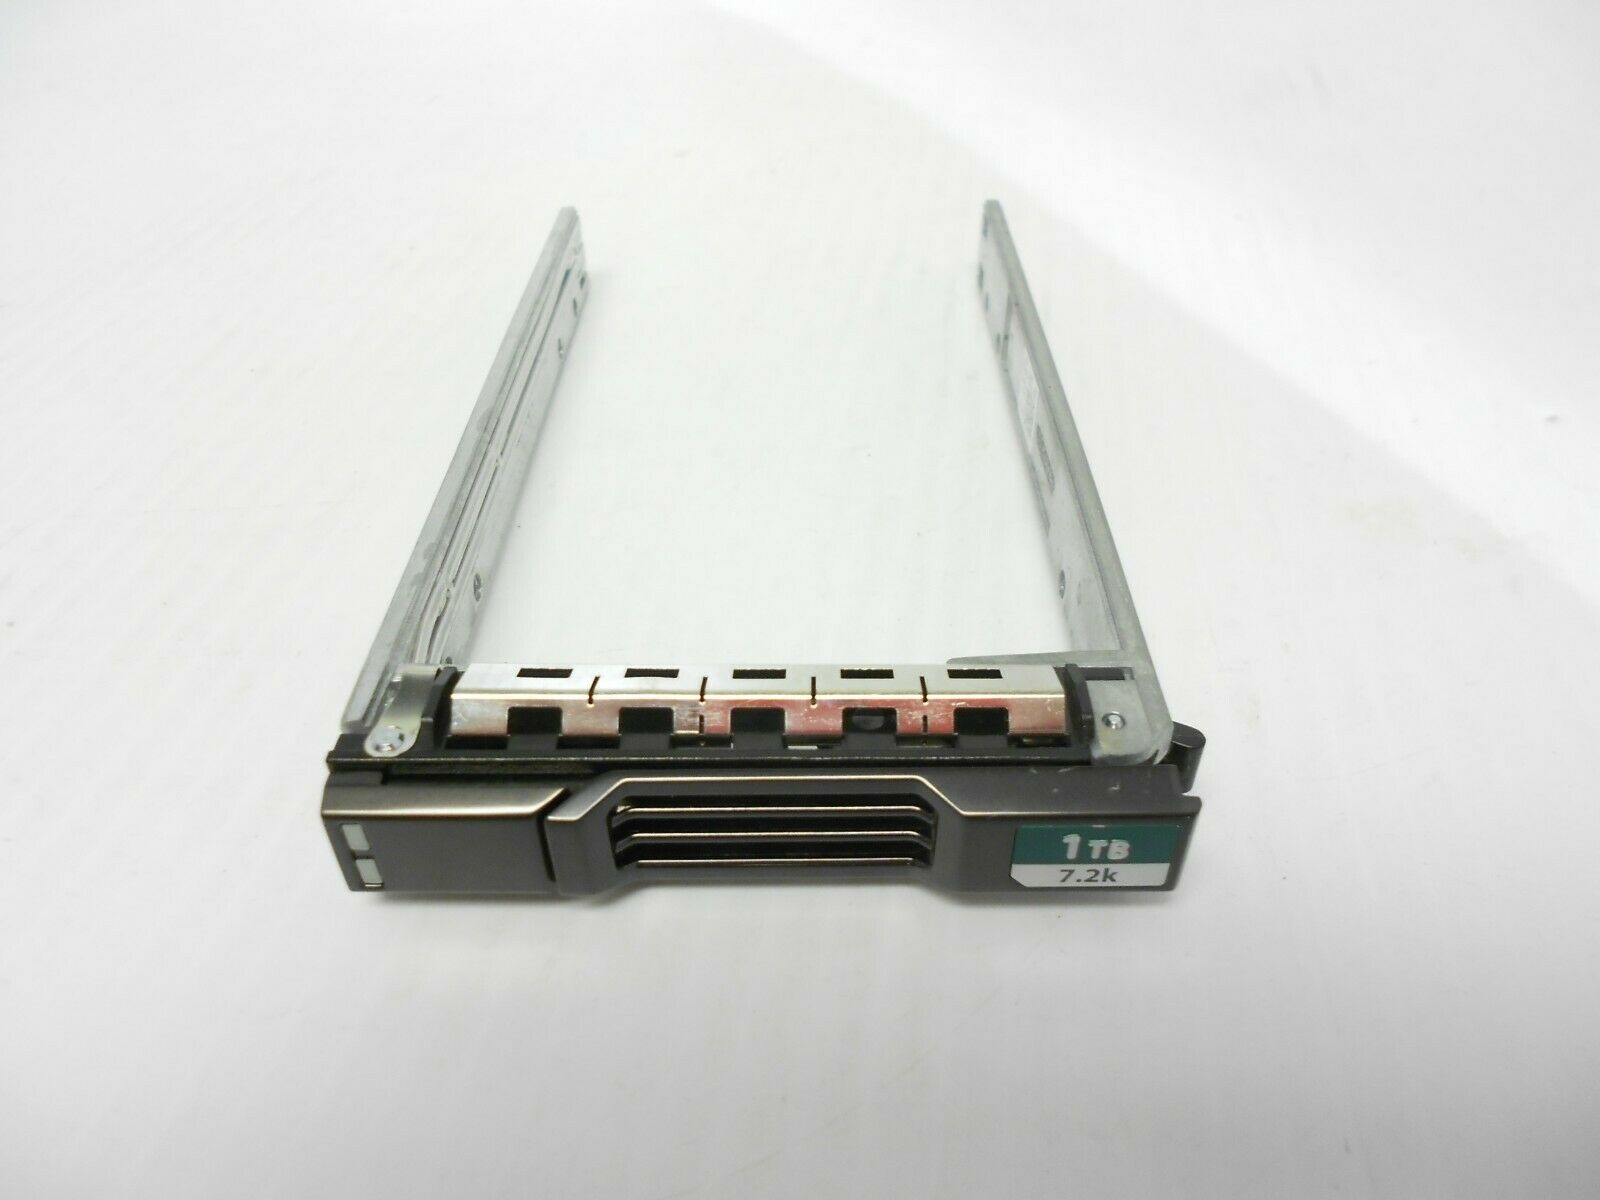 Dell Compellent Sc220 Caddy 2.5" Hard Drive Tray Carrier Equallogic Ps6210